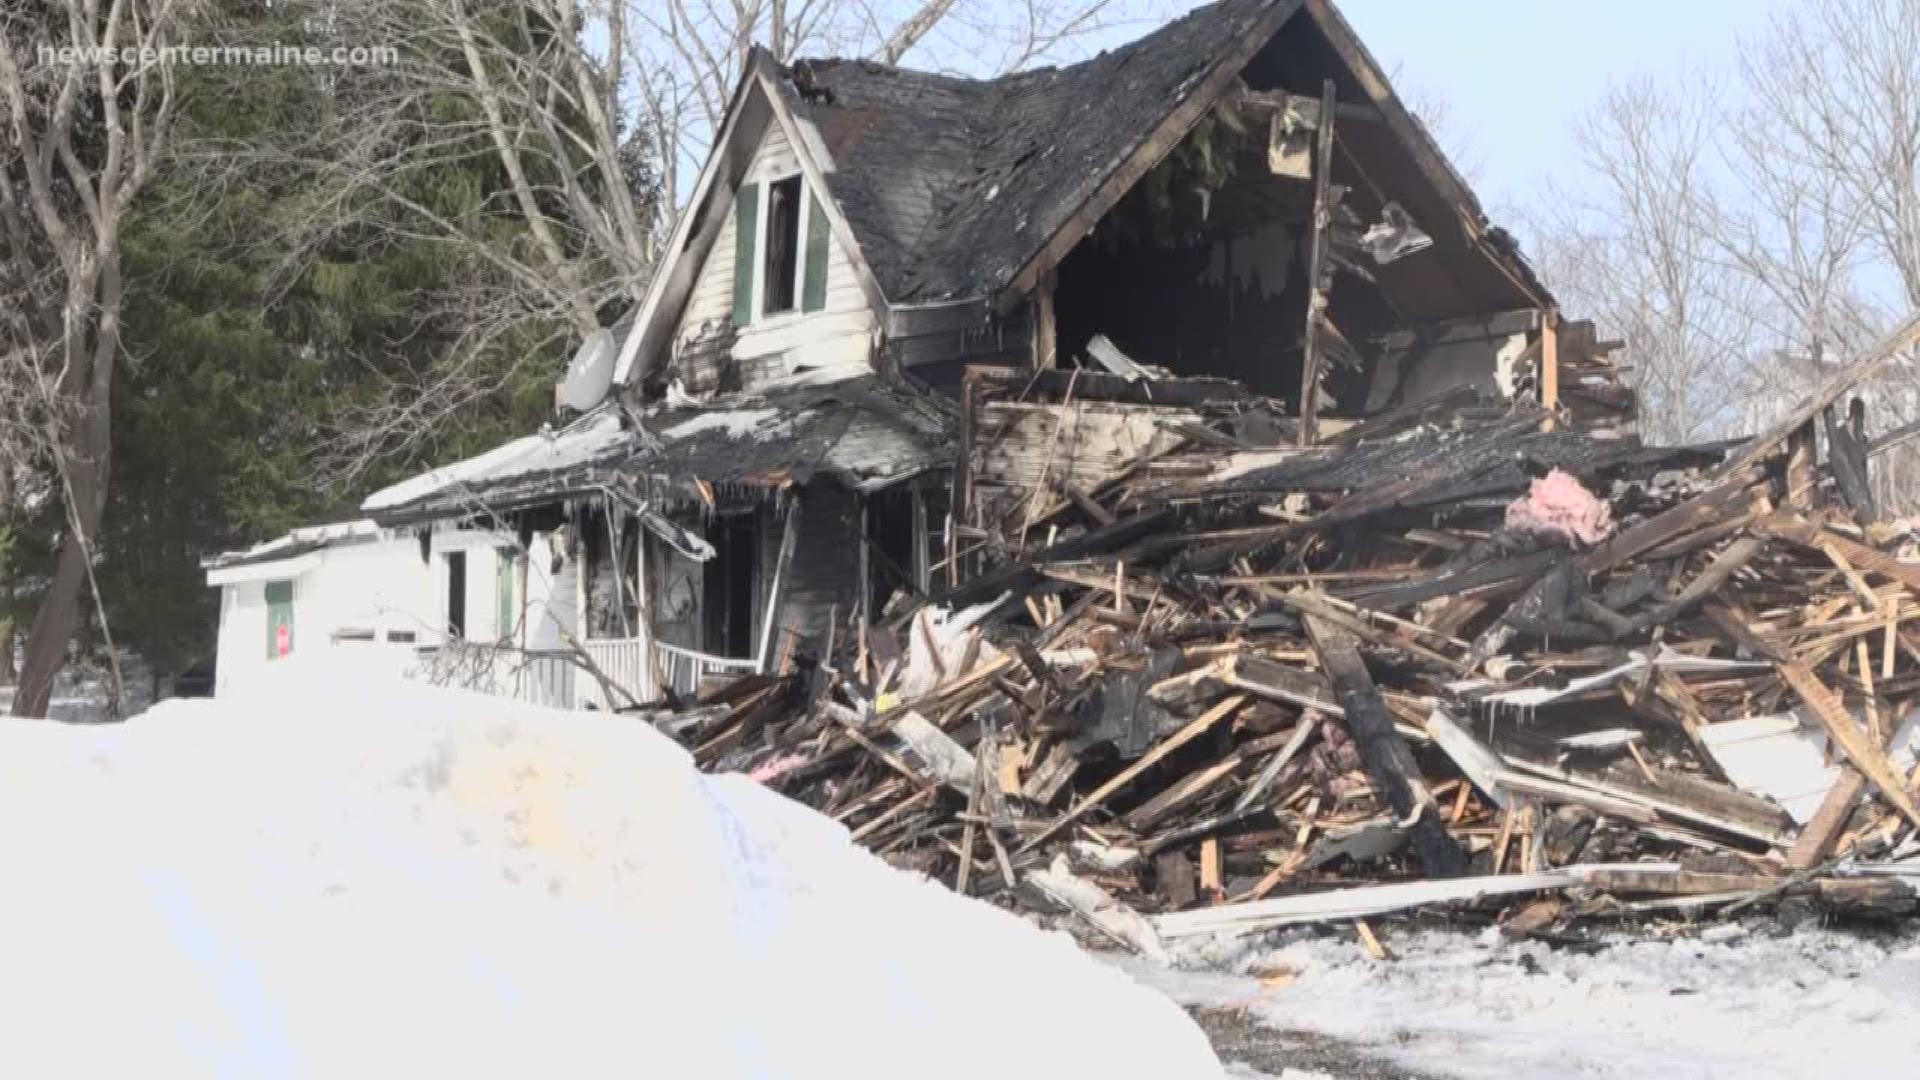 Four people are safe after an intense house fire in Hampden.